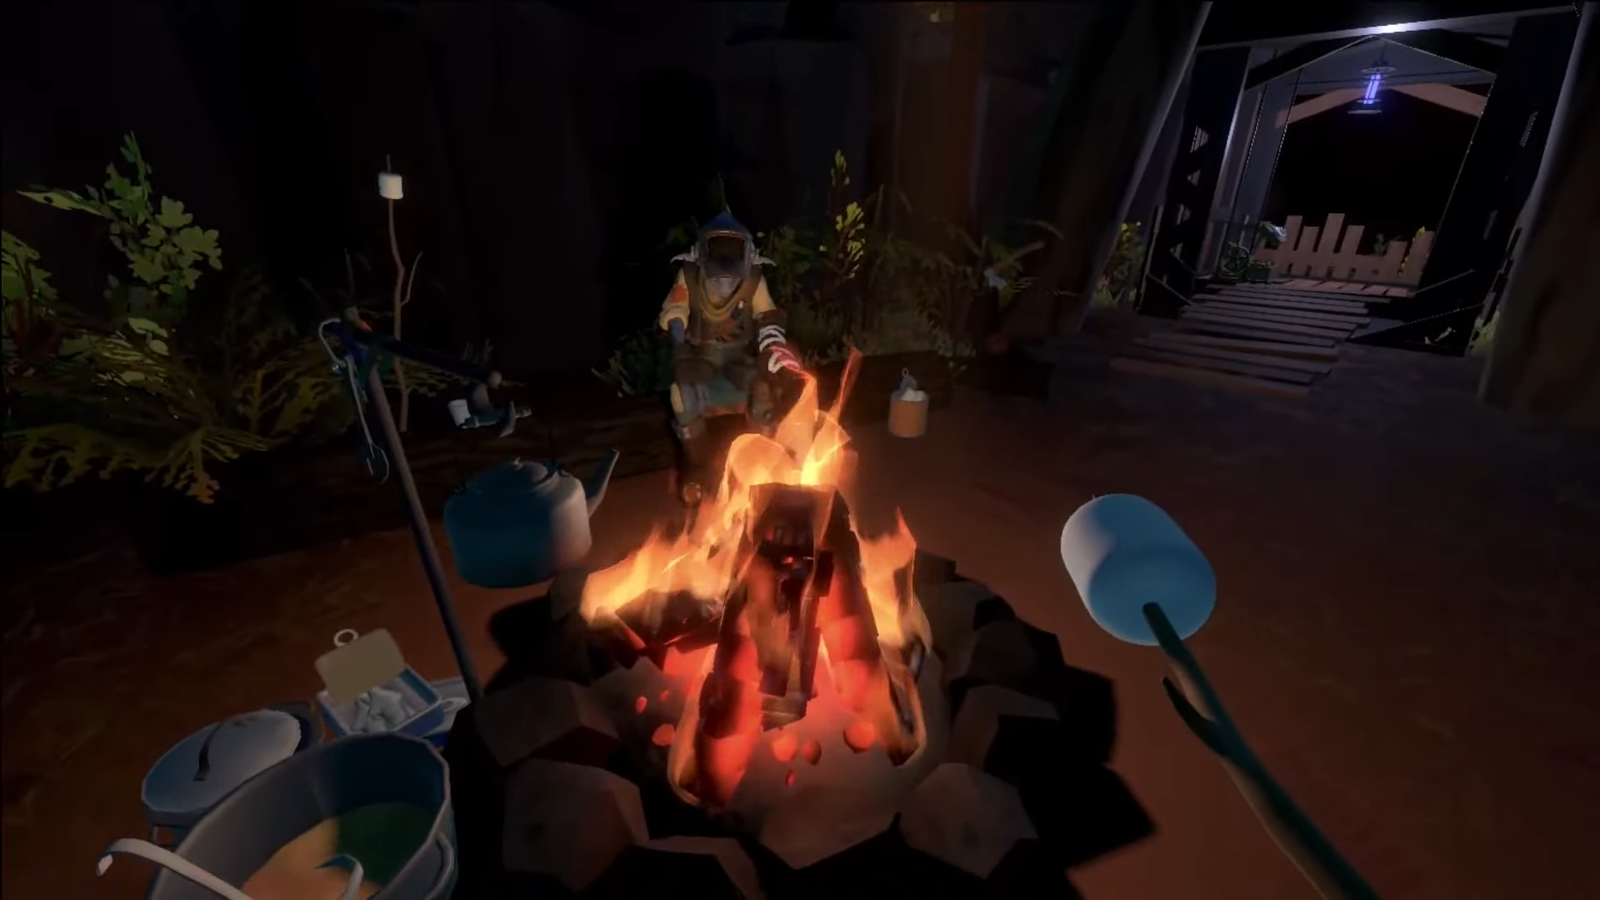 Critically-acclaimed Outer Wilds is NOW AVAILABLE to pre-order! – Limited  Run Games